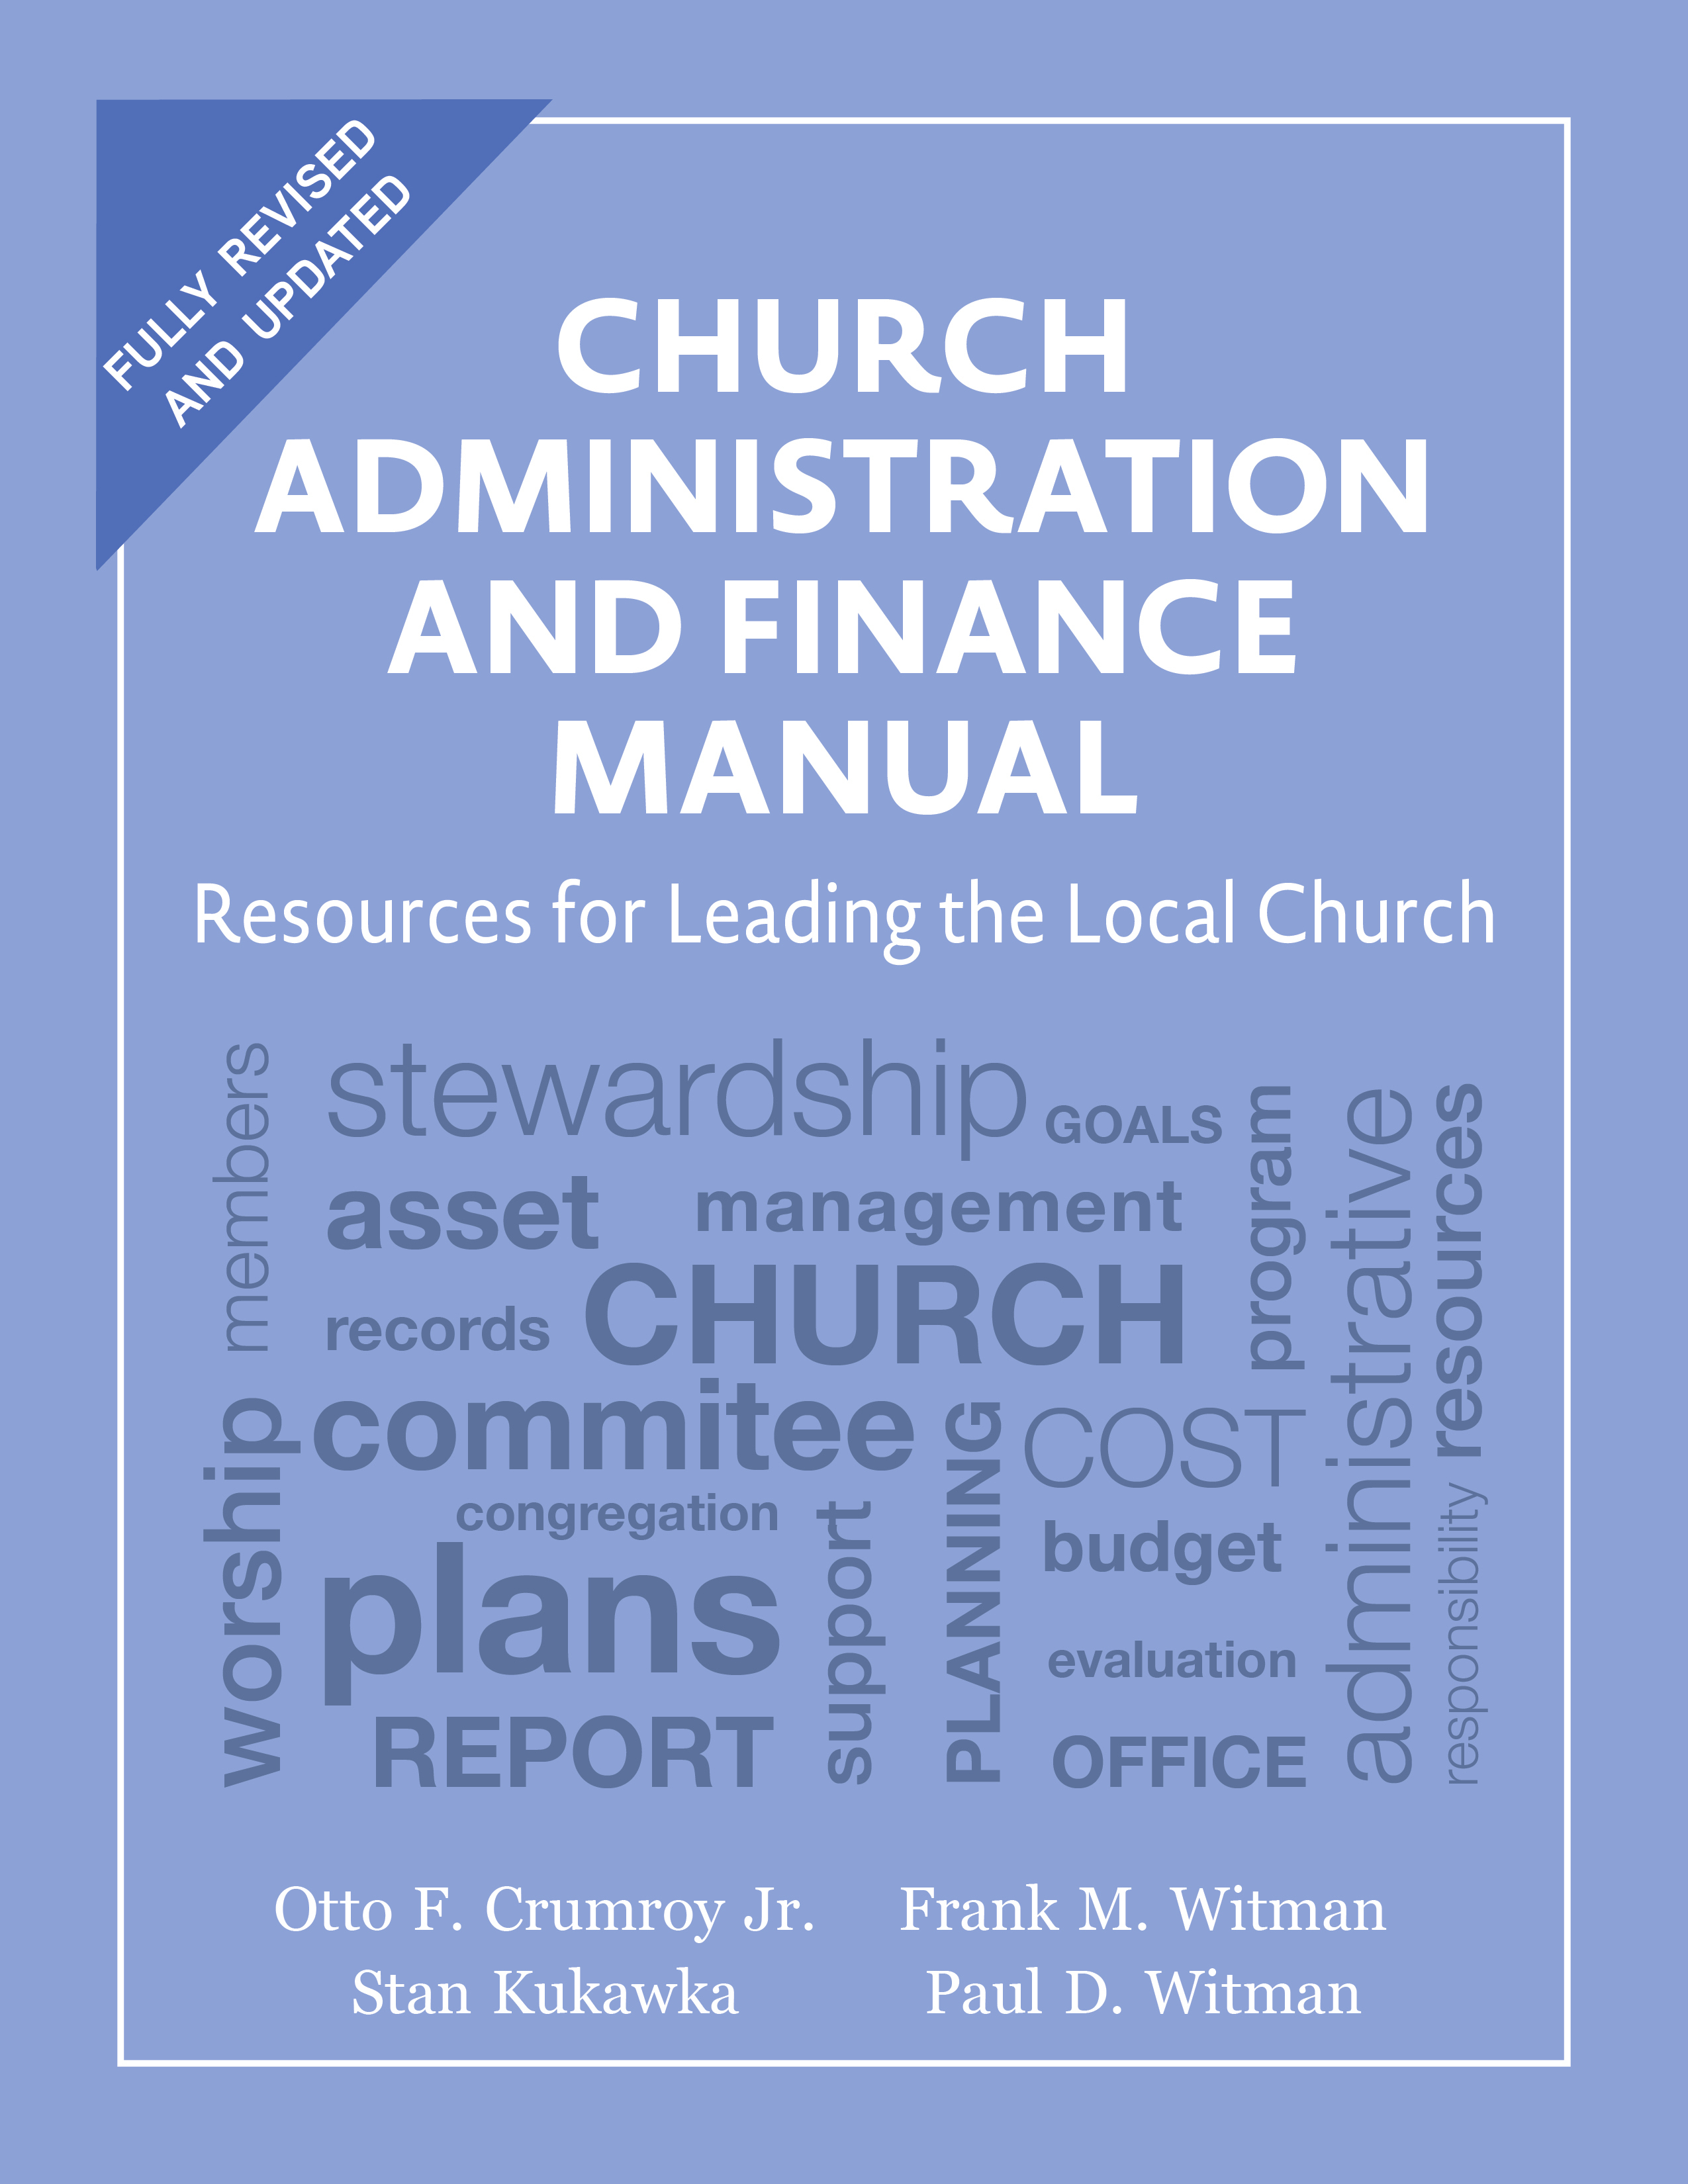 research topics on church administration